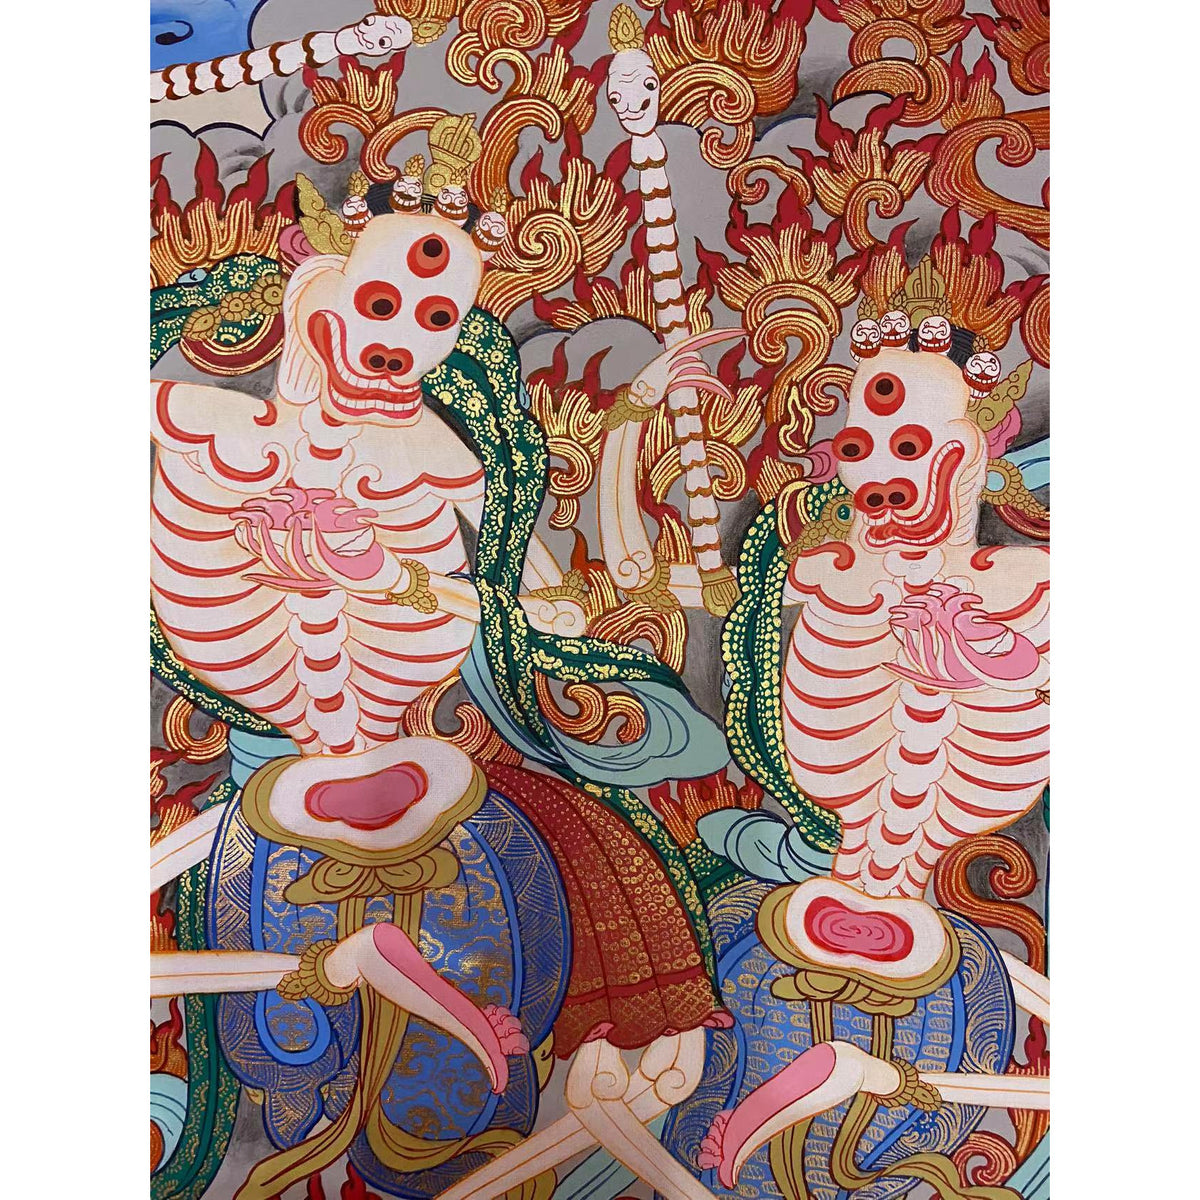 32 BLESSED BROCADE WOOD SCROLL TIBETAN THANGKA : CITIPATI, LORDS OF DEATH  =